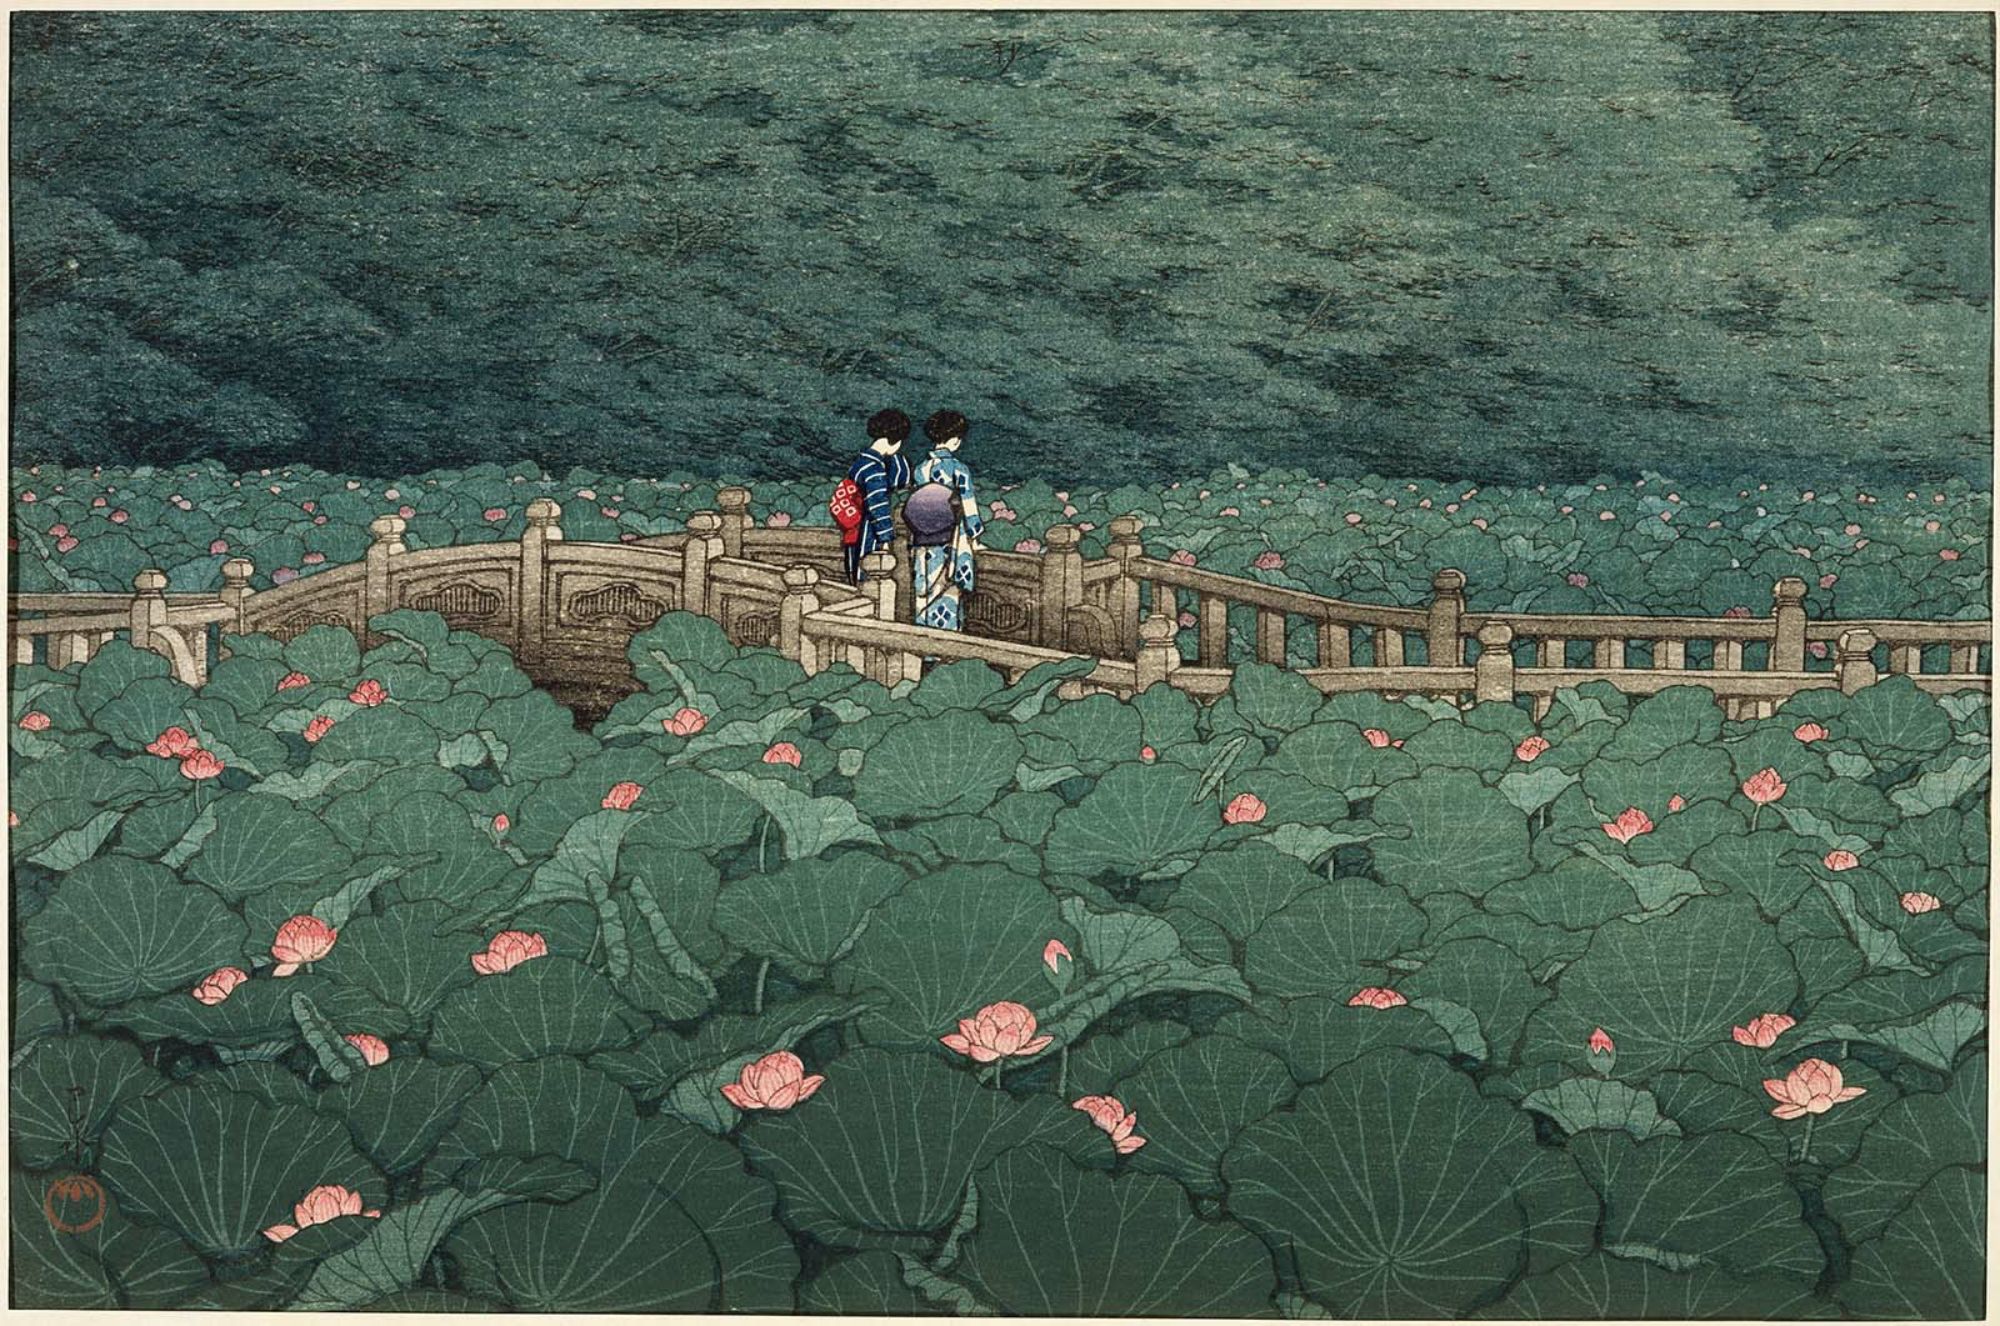 The pond at Benten Shrine in Shiba by Hasui Kawase